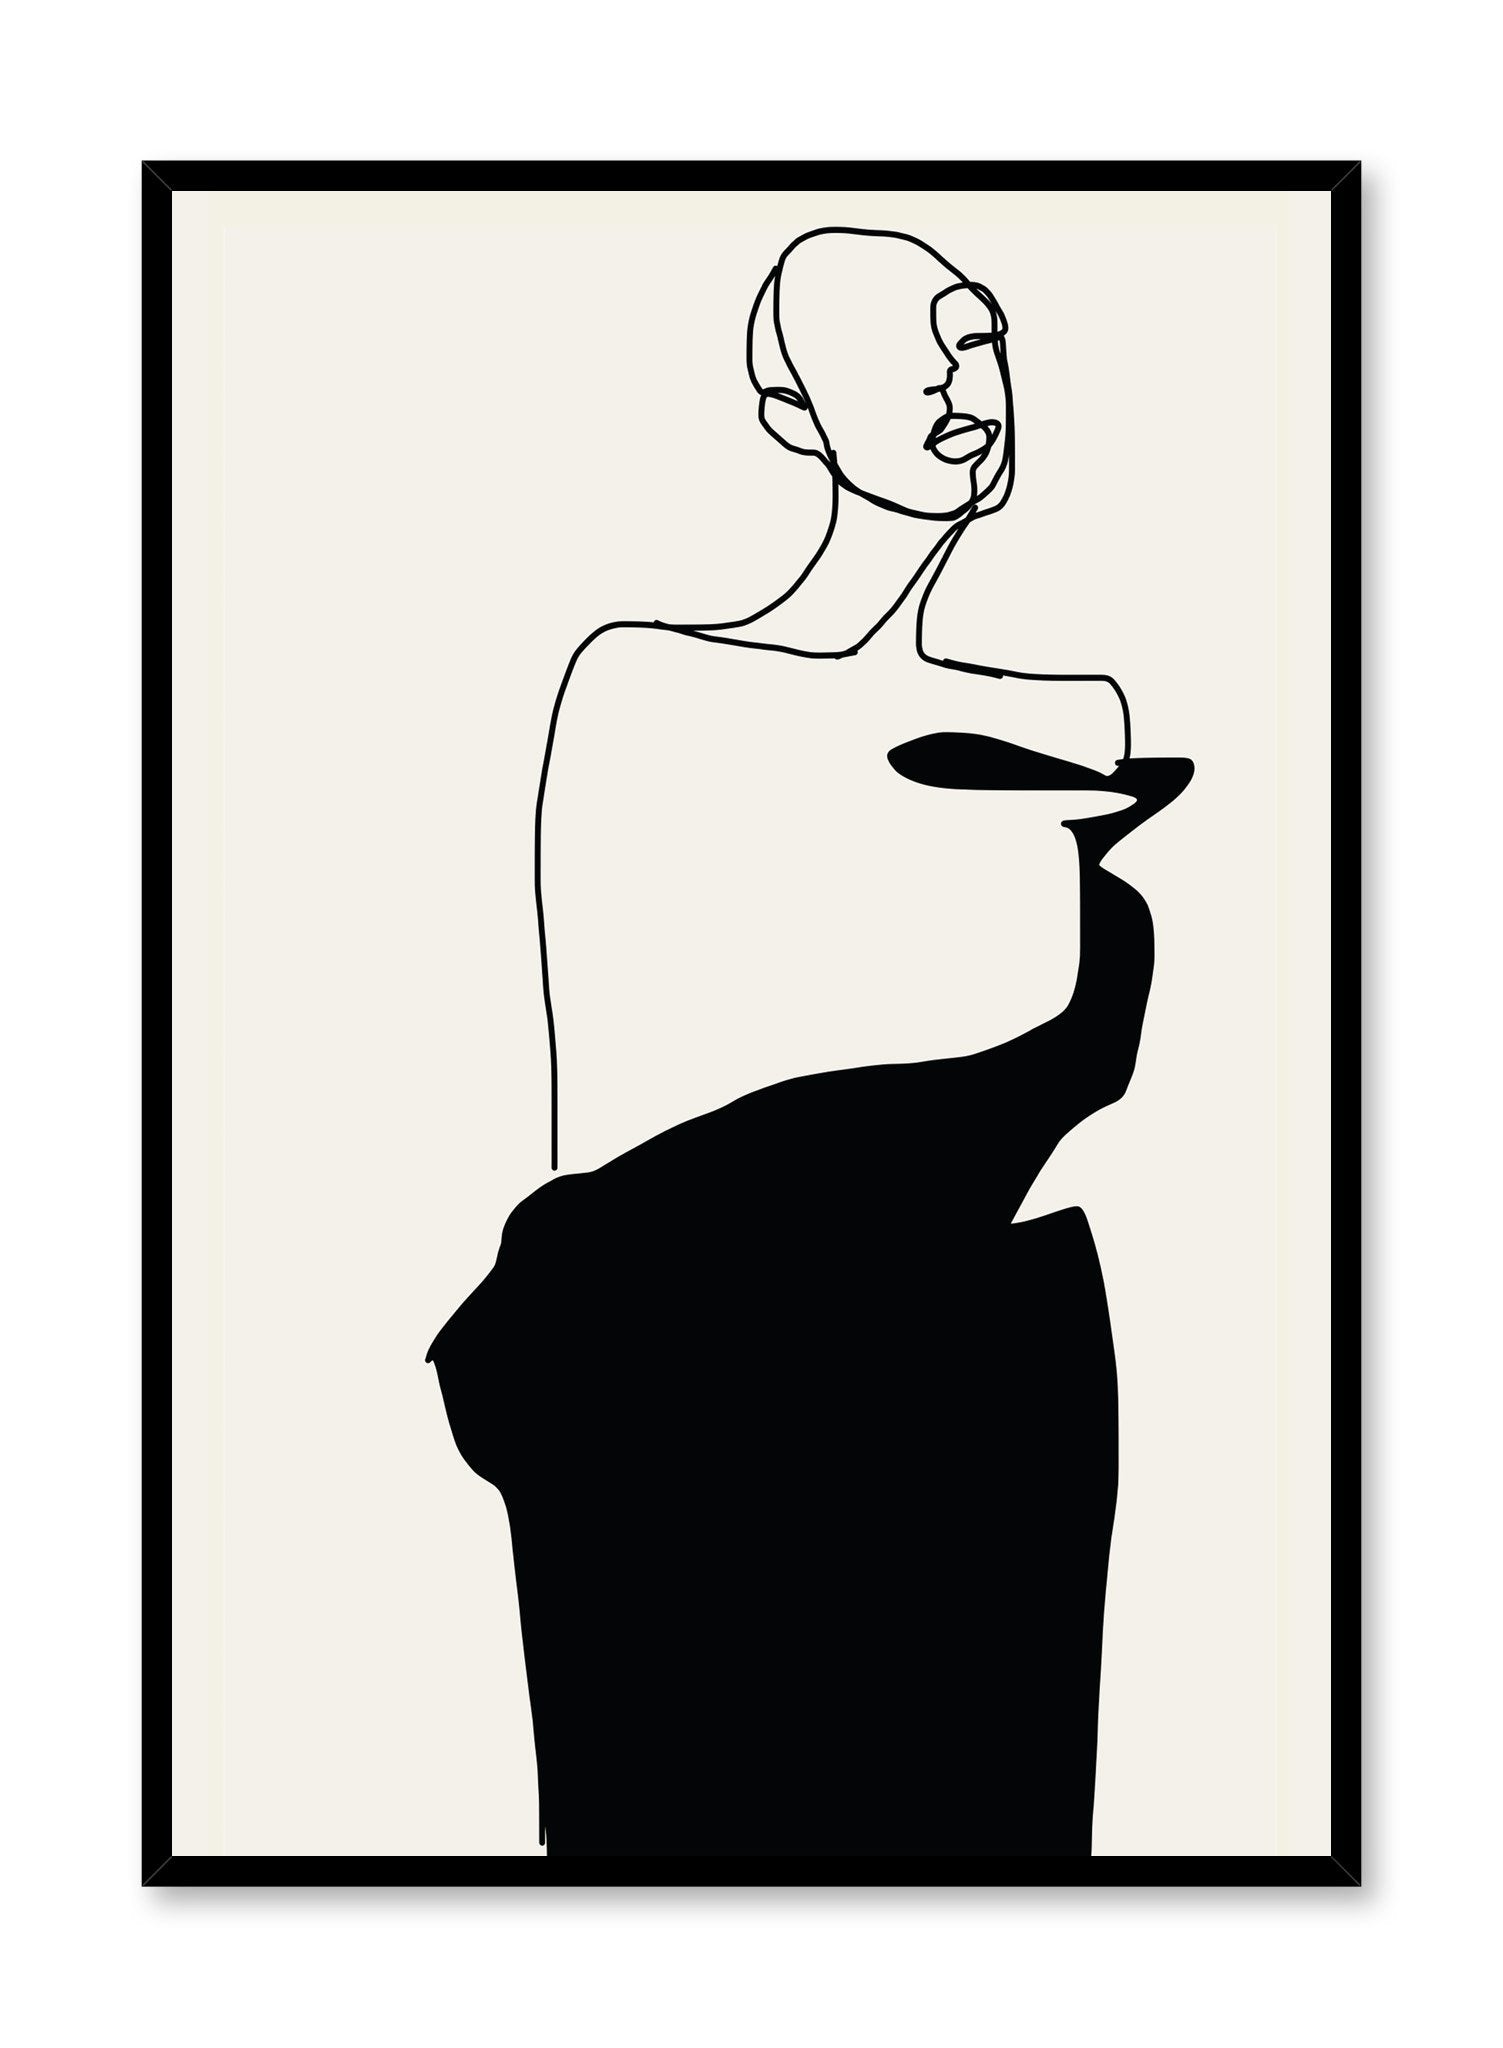 Fashion illustration poster by Opposite Wall with abstract woman drawing